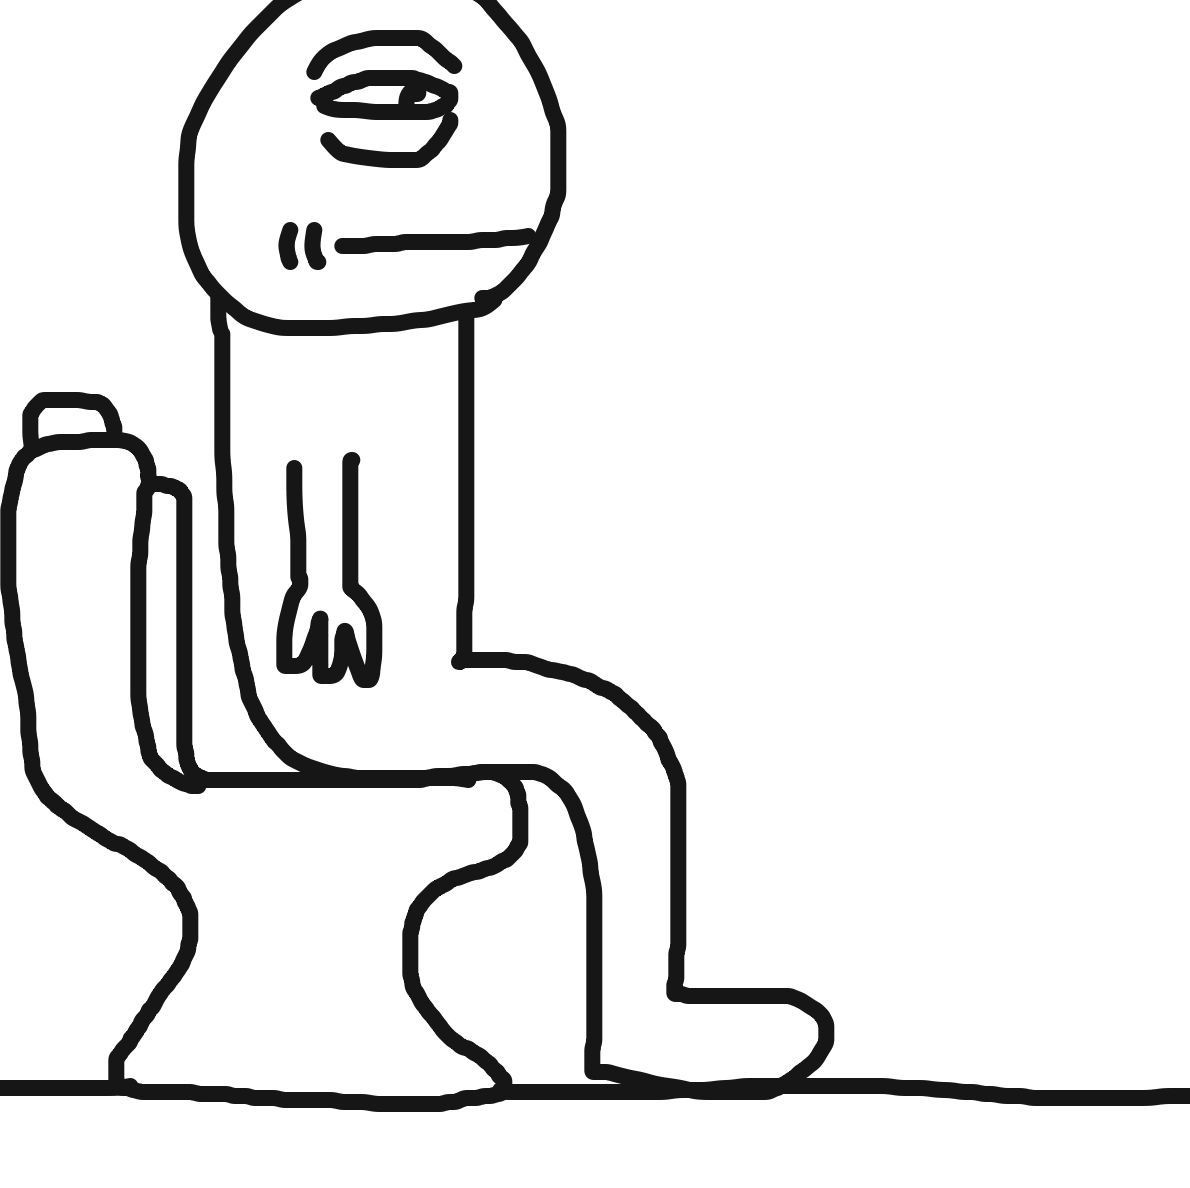 Our friend Gerald is sitting on the toilet - Online Drawing Game Comic Strip Panel by Uugh